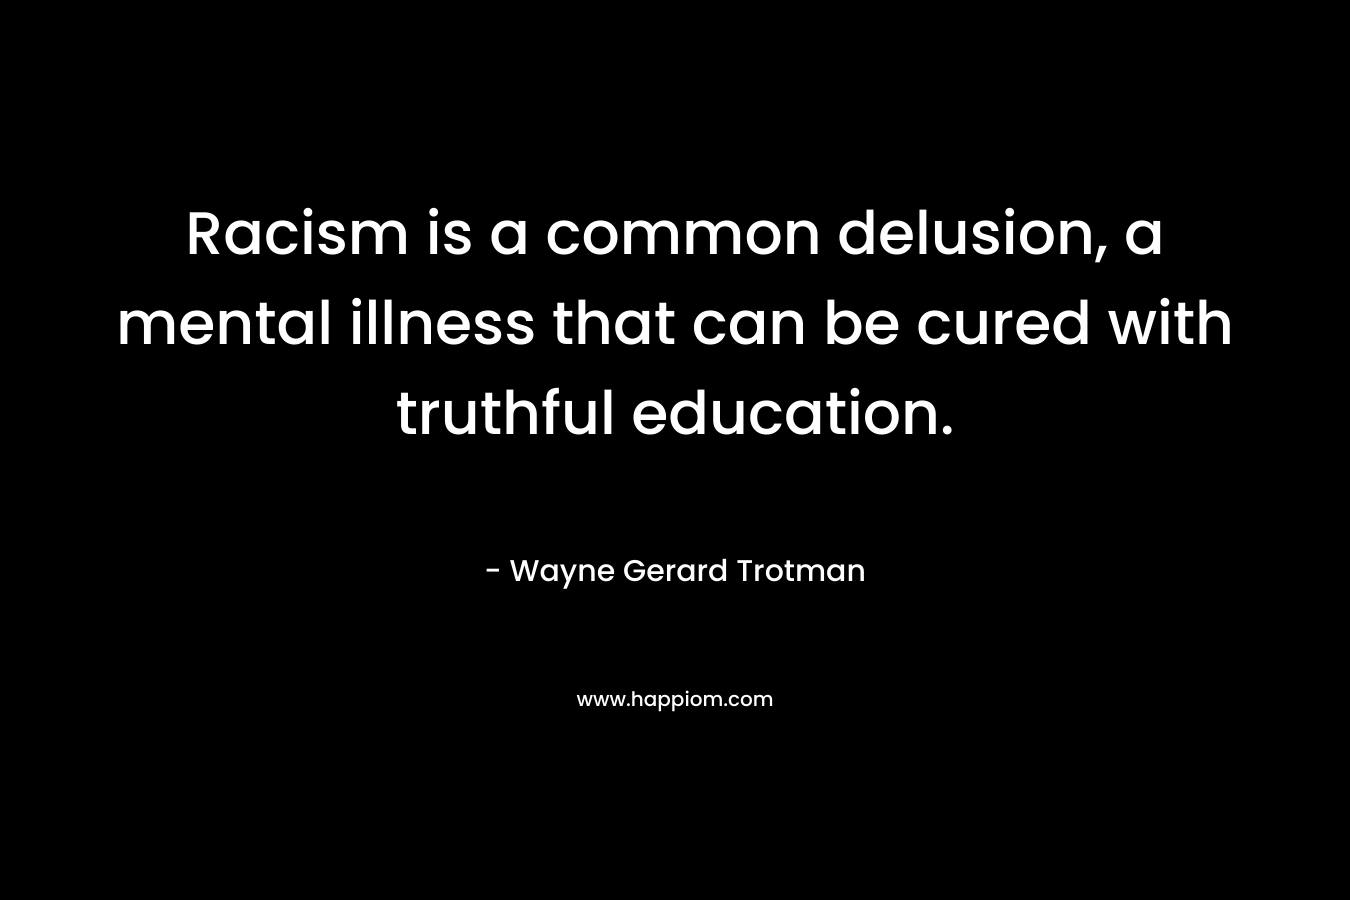 Racism is a common delusion, a mental illness that can be cured with truthful education. – Wayne Gerard Trotman